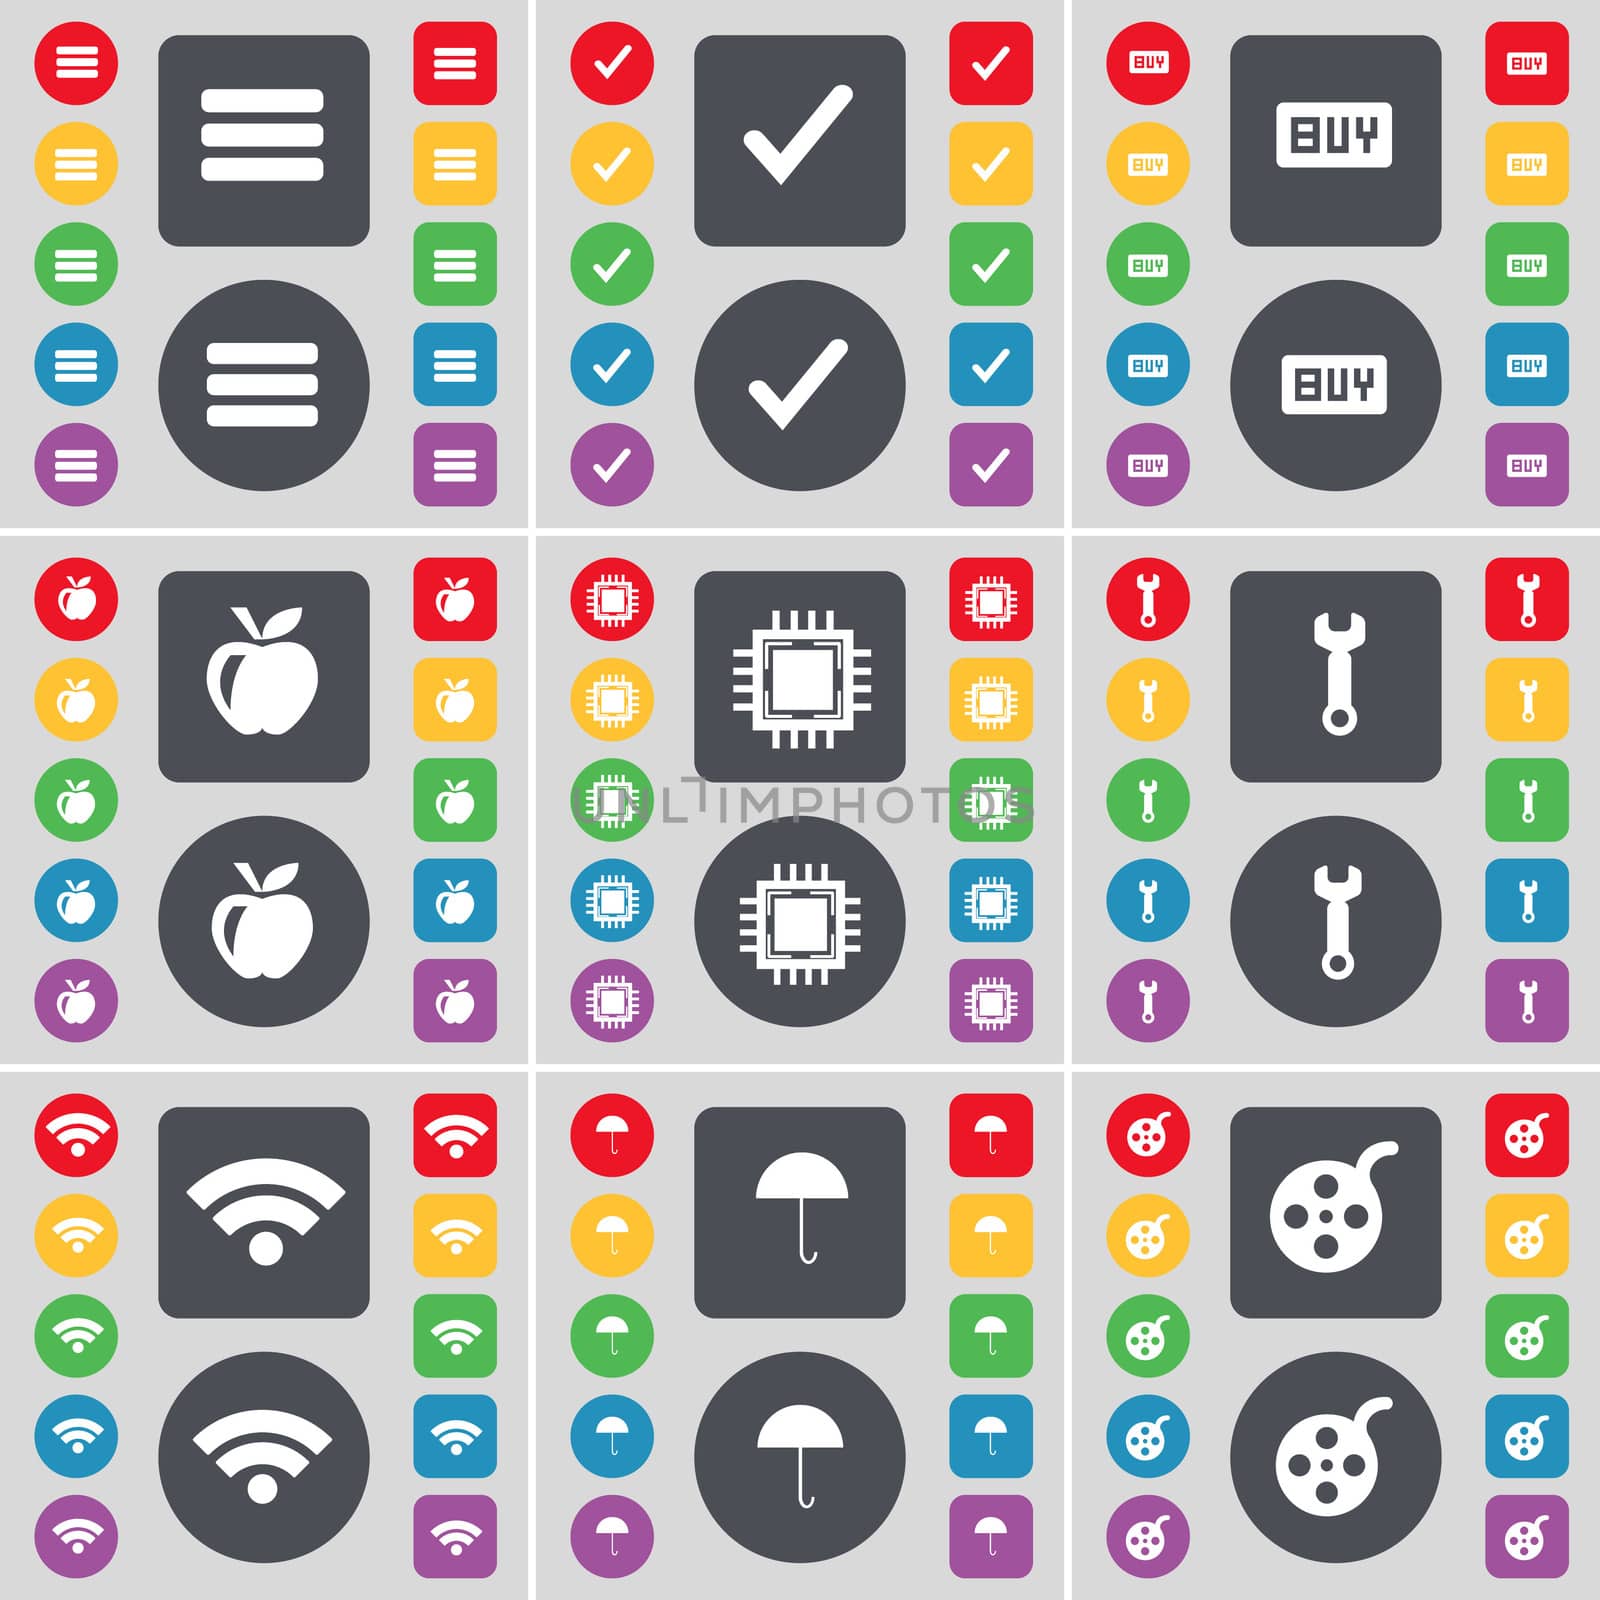 Apps, Tick, Buy, Apple, Processor, Wrench, Wi-Fi, Umbrella, Videotape icon symbol. A large set of flat, colored buttons for your design. illustration